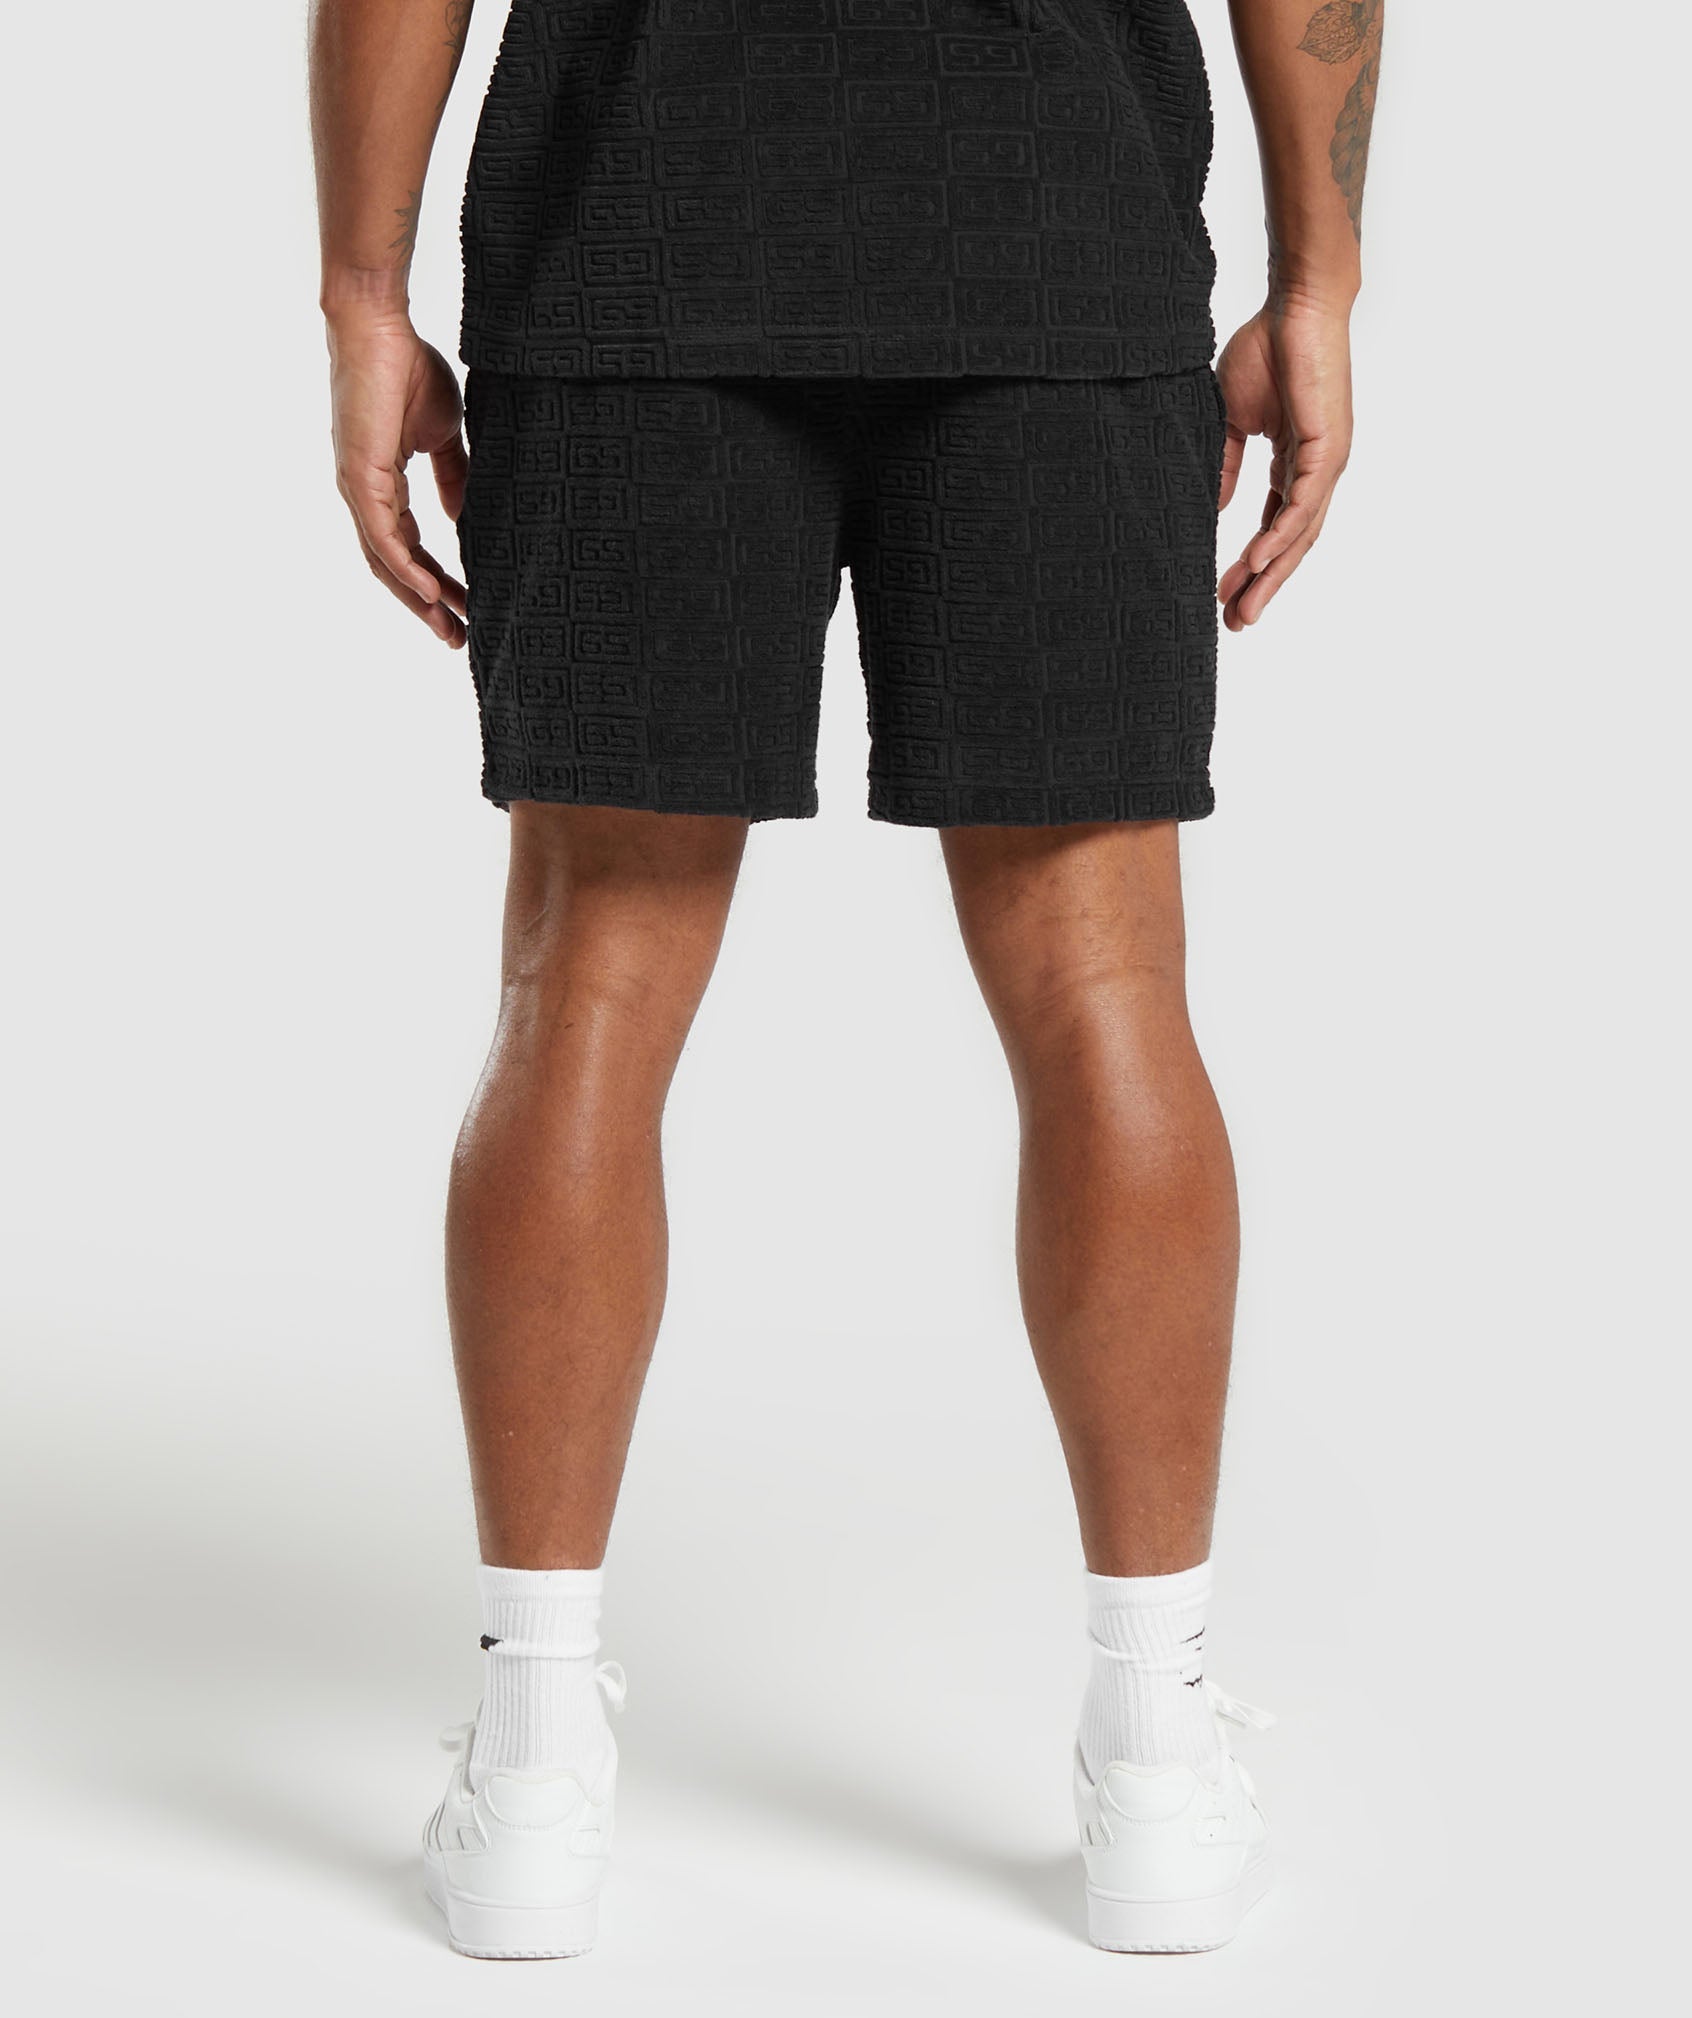 Towelling 7" Shorts